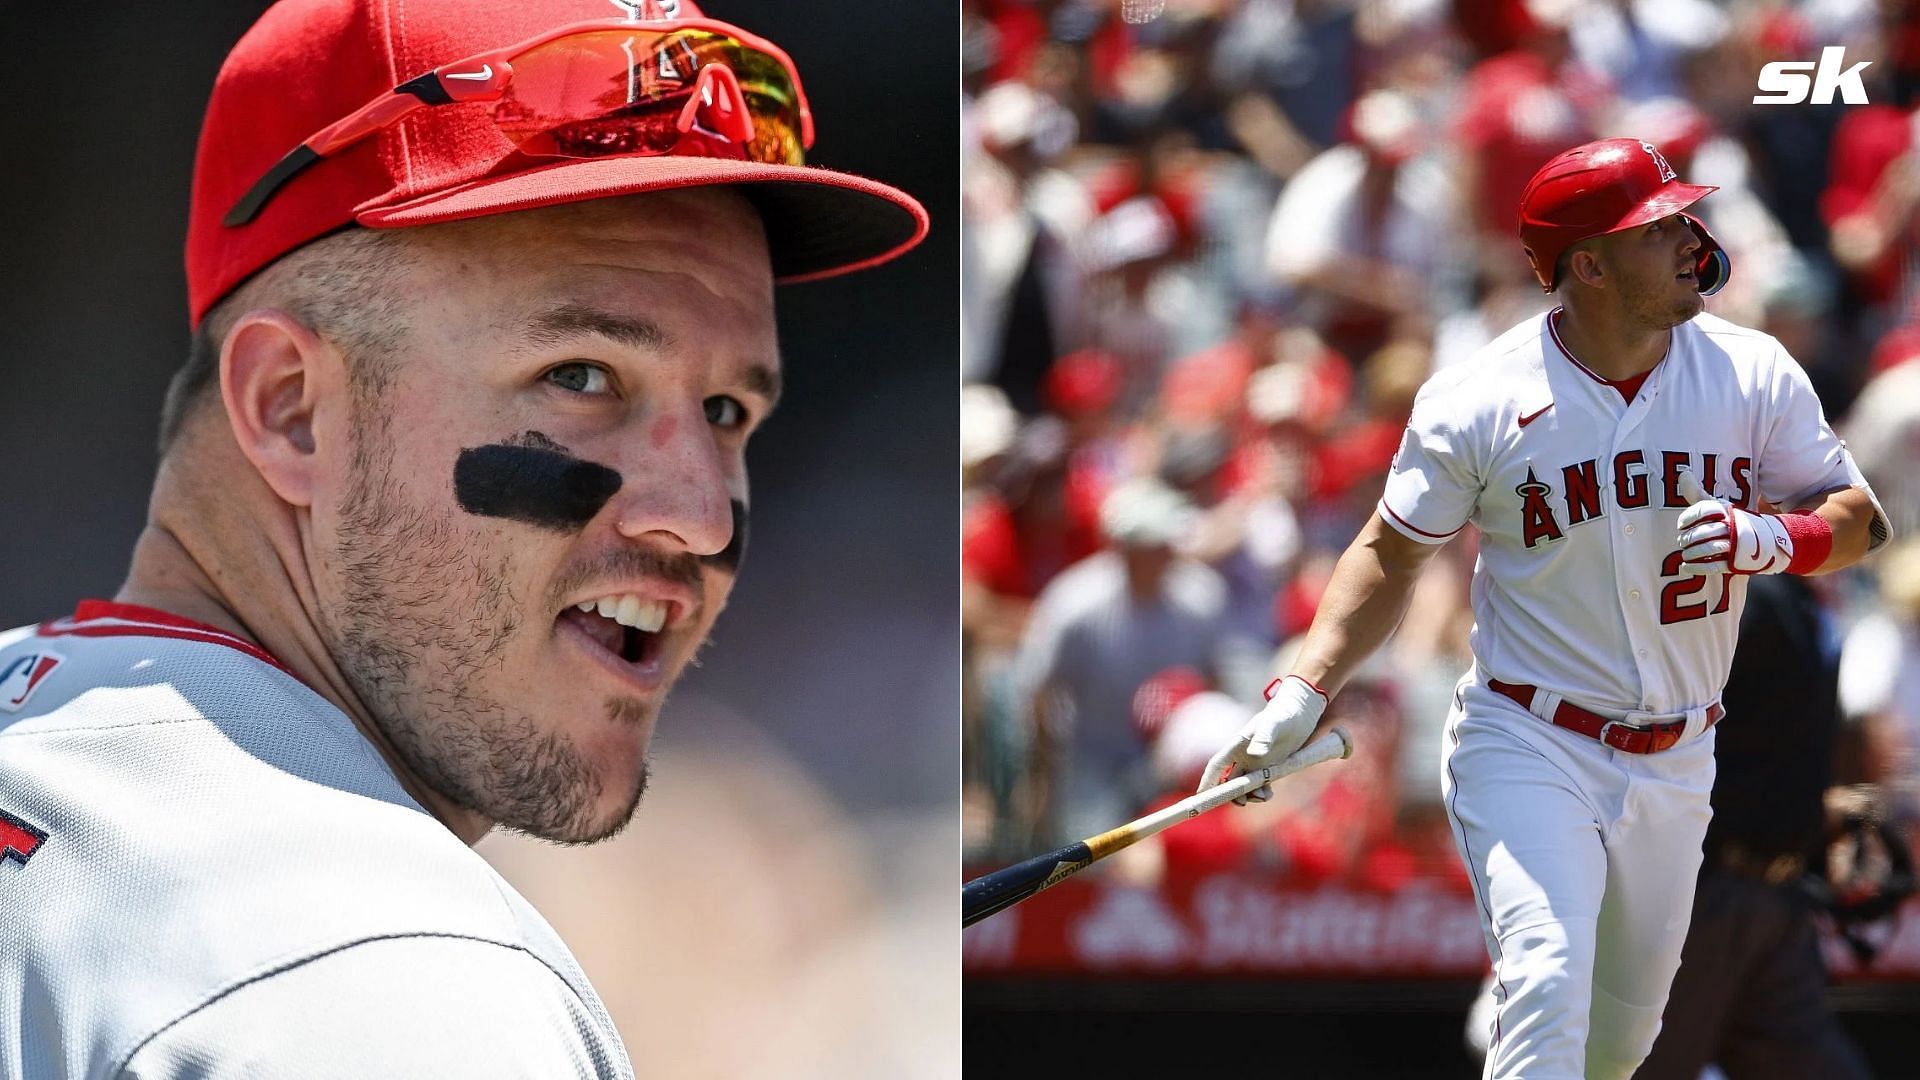 We asked AI to predict Mike Trout